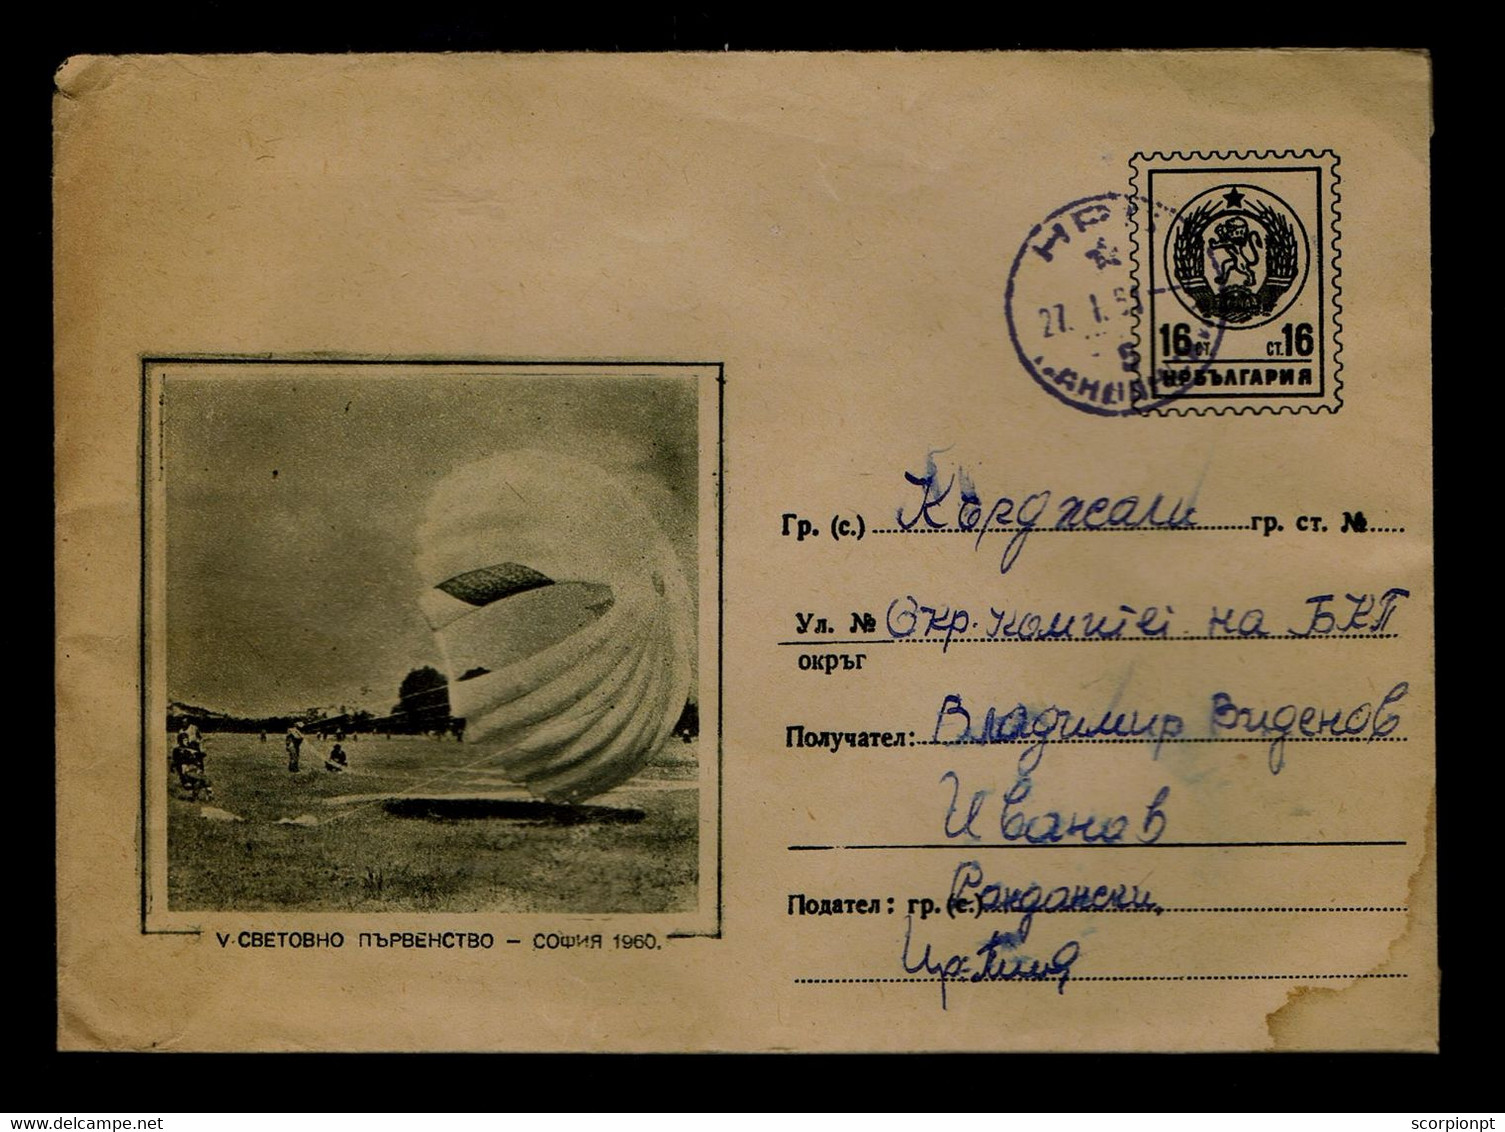 Sp8288 BULGARIA Parachutting Sports Cover Postal Stationery Mailed 1960 - Parachutting